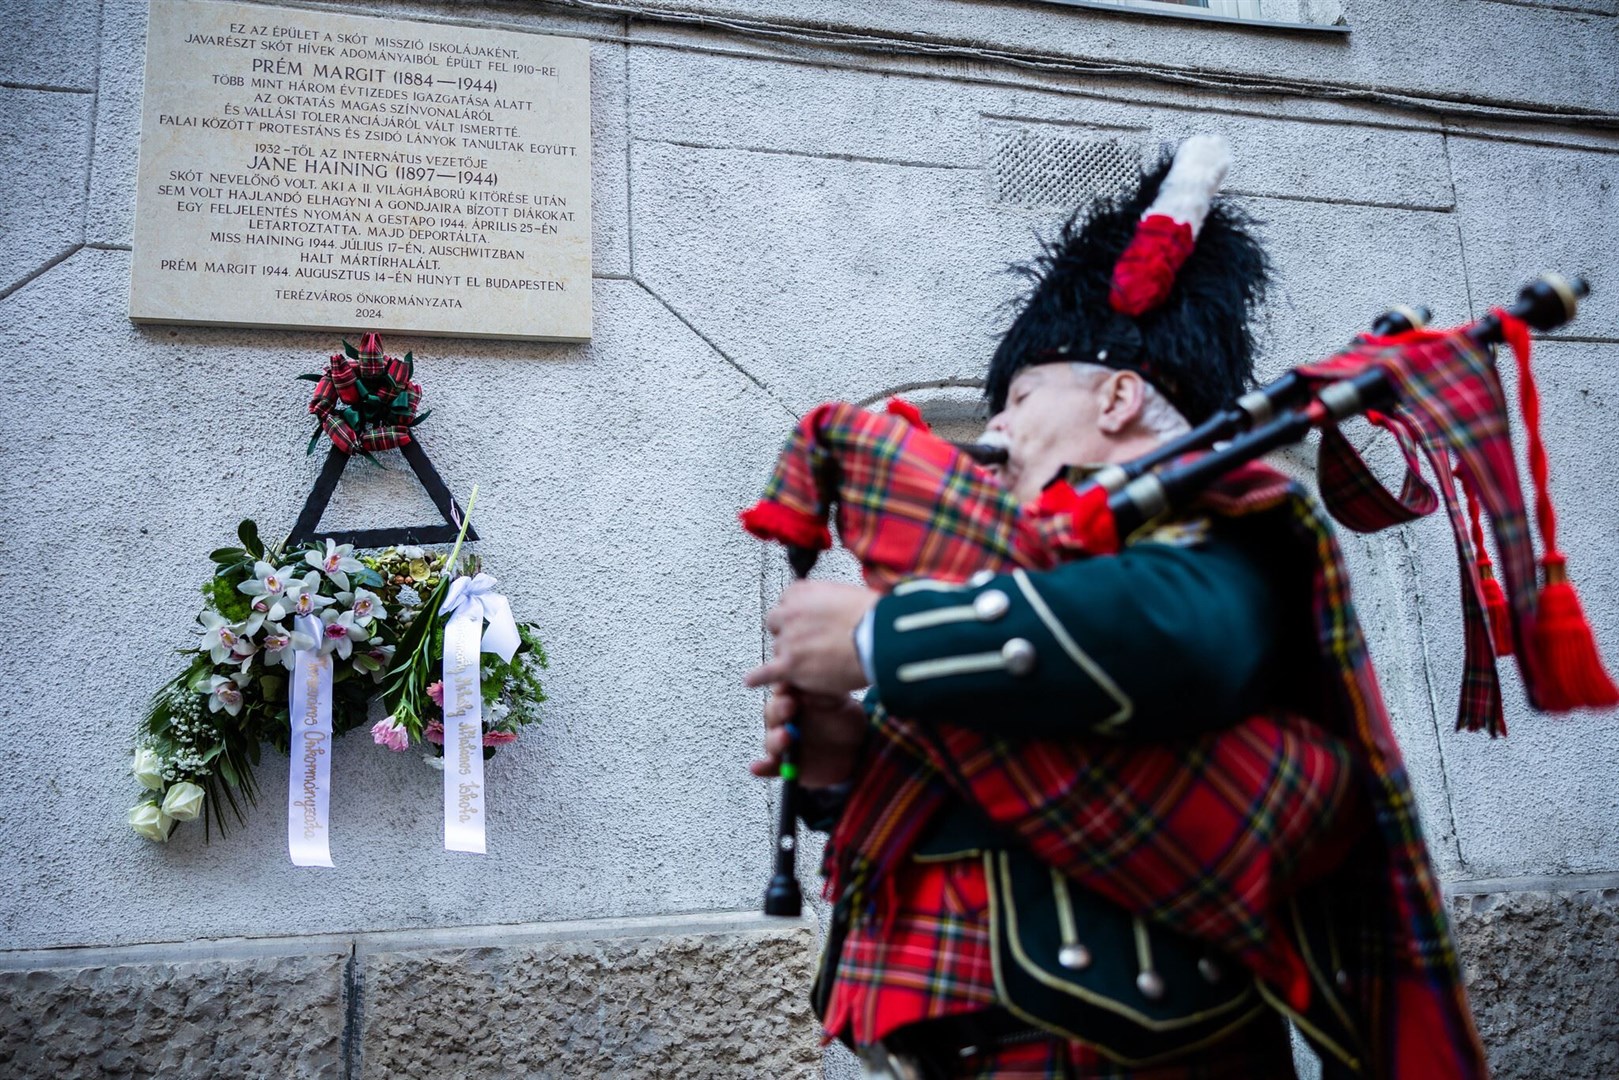 A piper at the ceremony in Budapest (Barta Balint/Church of Scotland/PA)